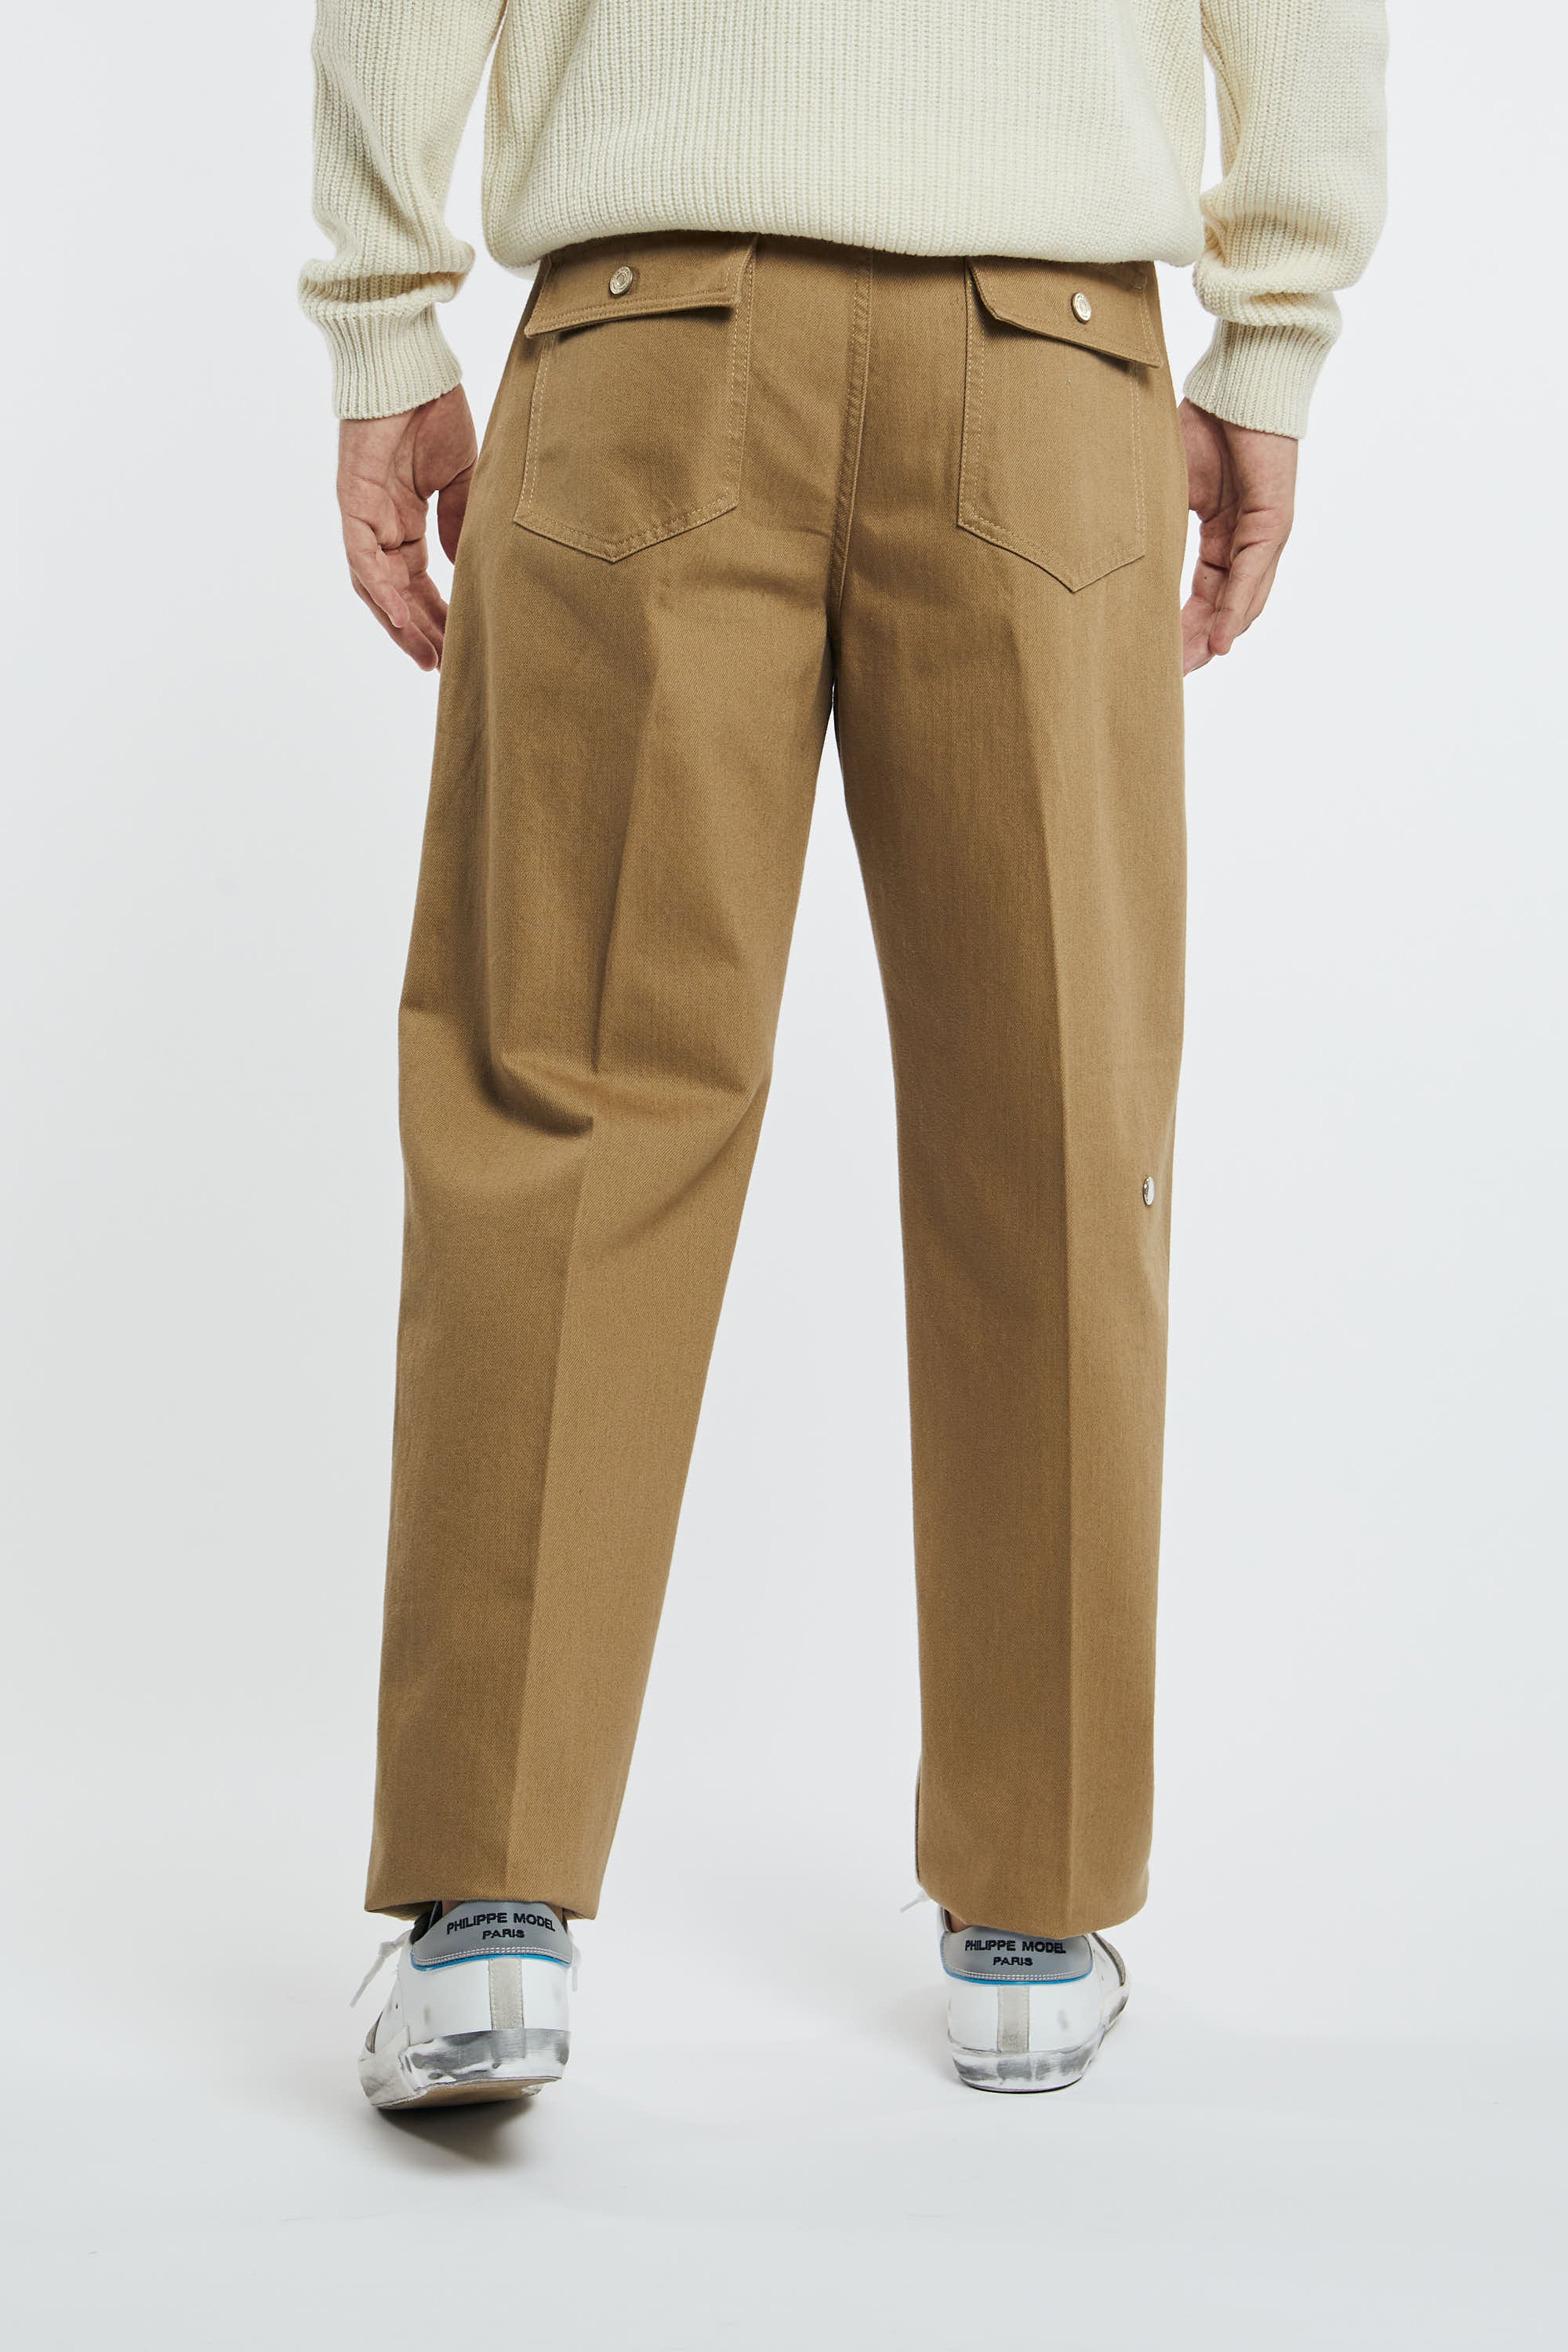 Philippe Model Charles Cotton Pants Beige-5